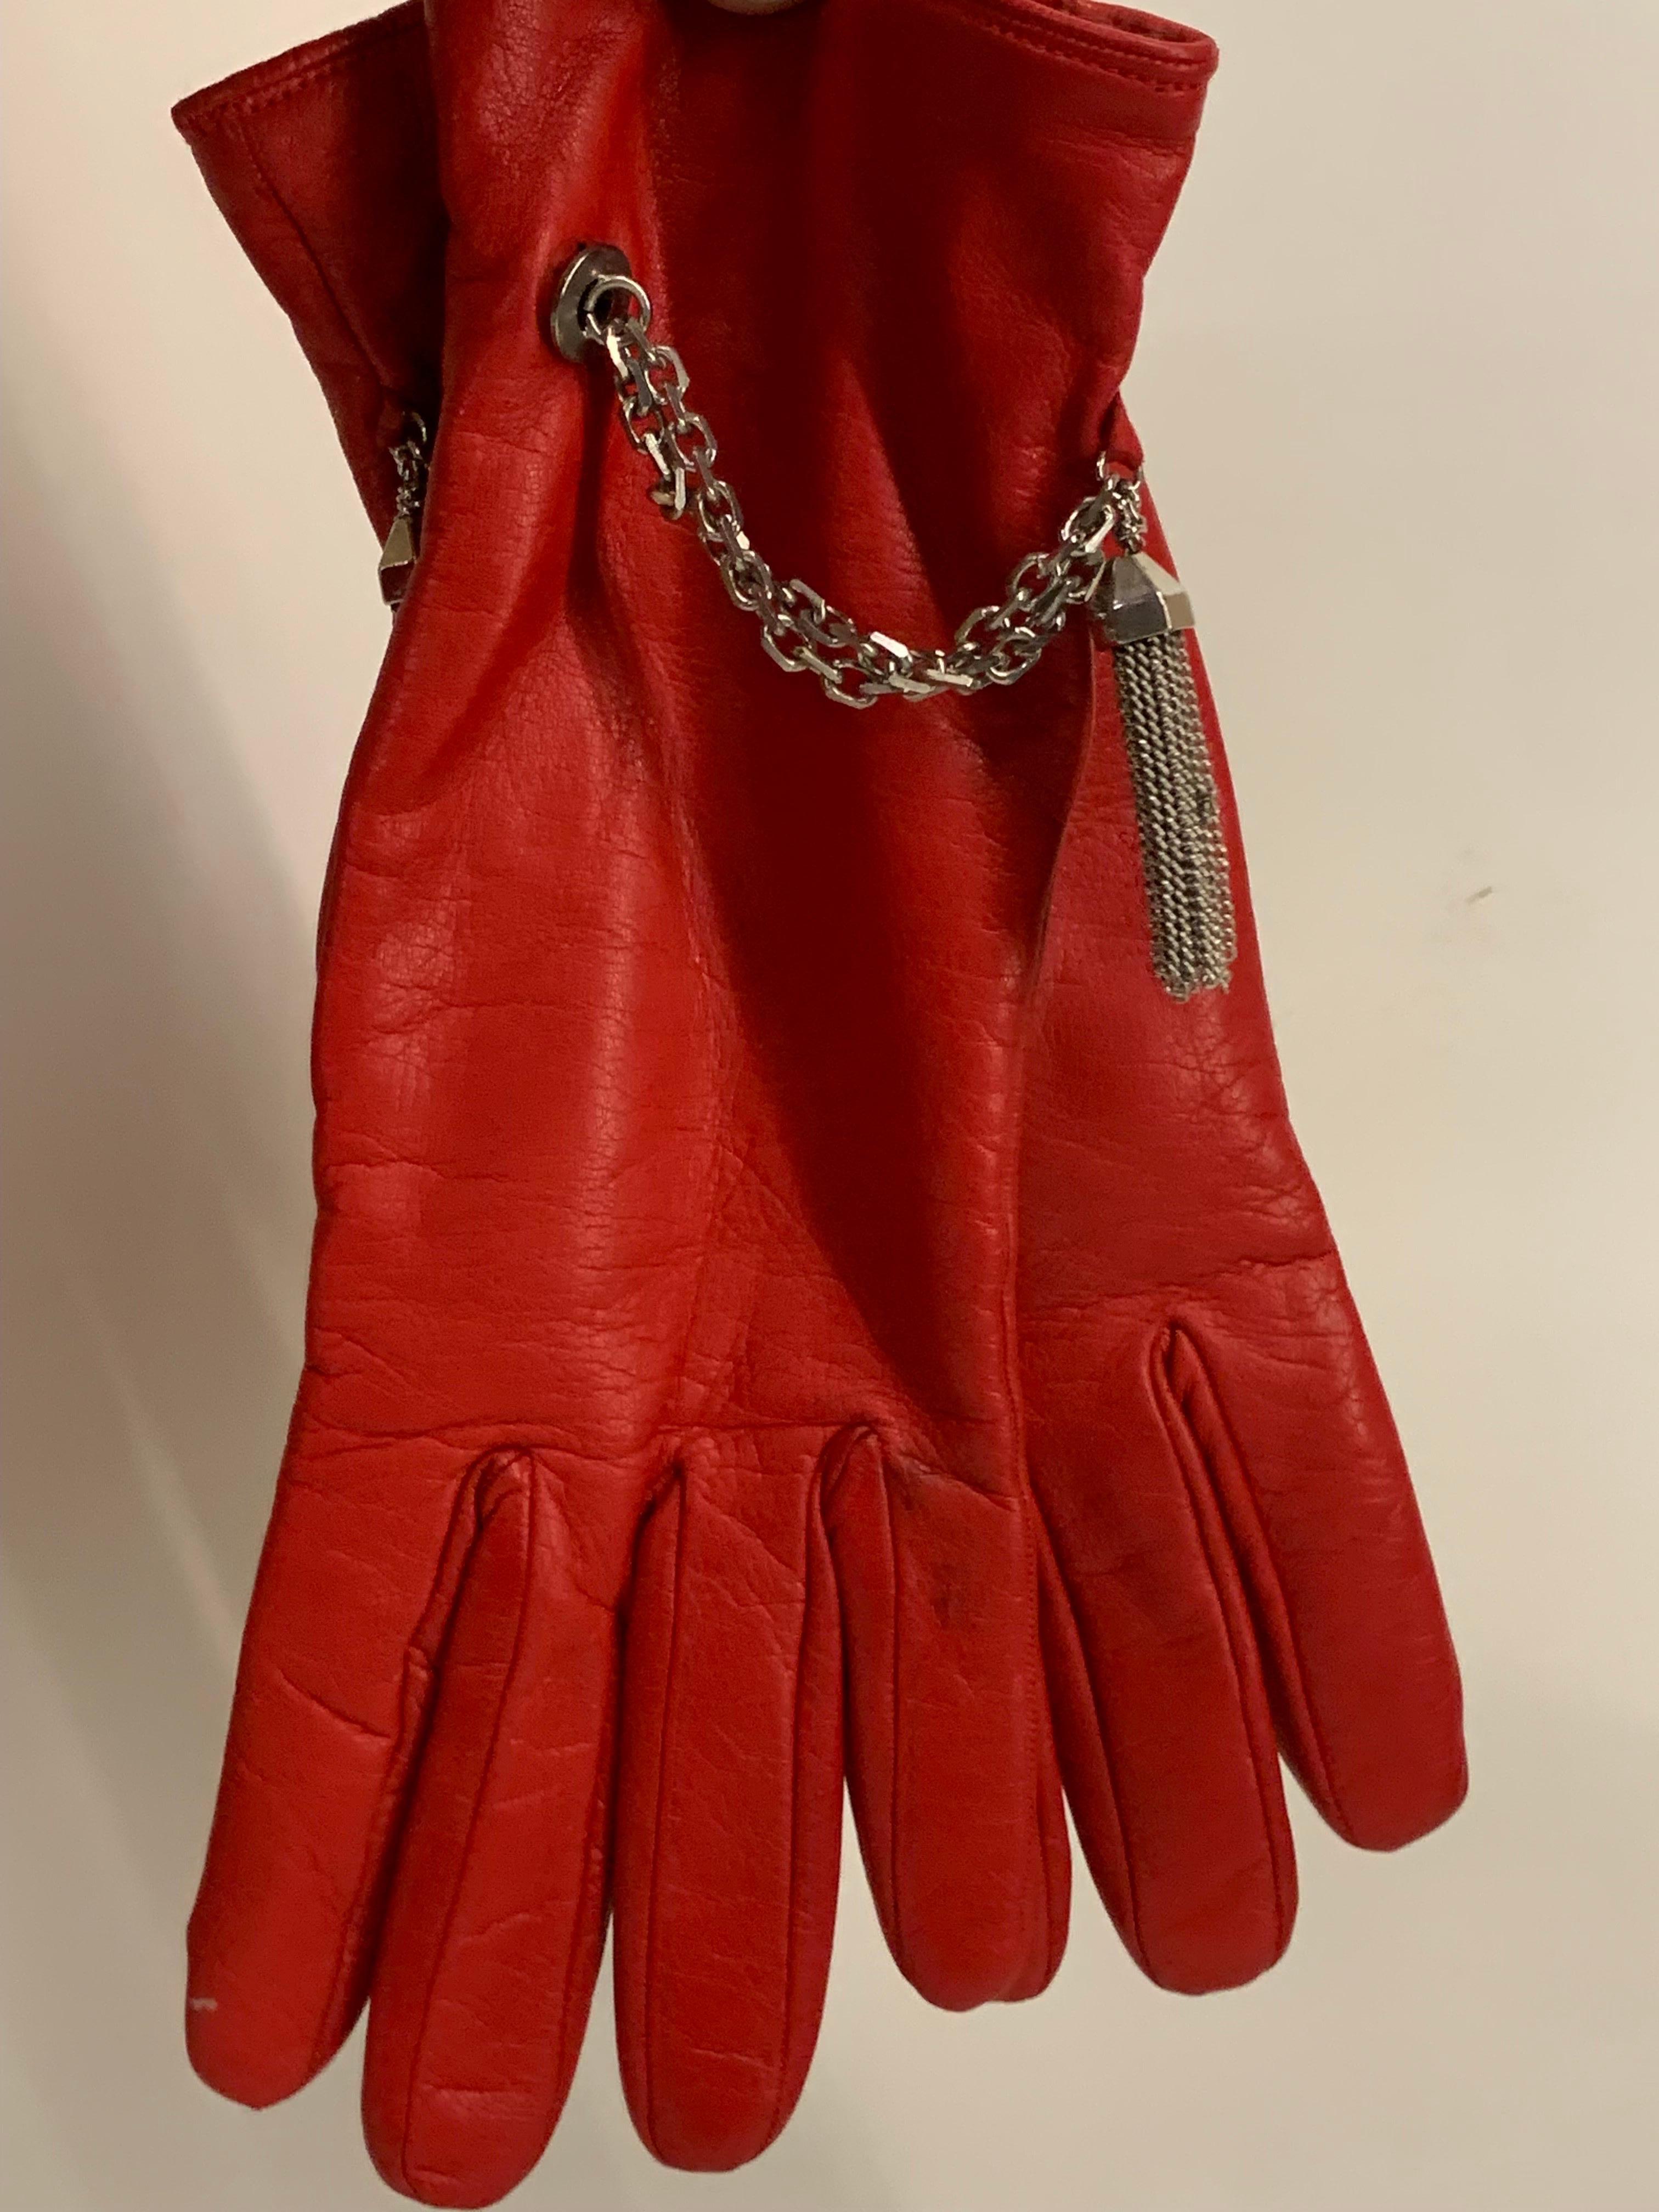 1980s Gianni Versace Red Kid Leather Gloves w Cashmere Lining & Tassel Chain  For Sale 2